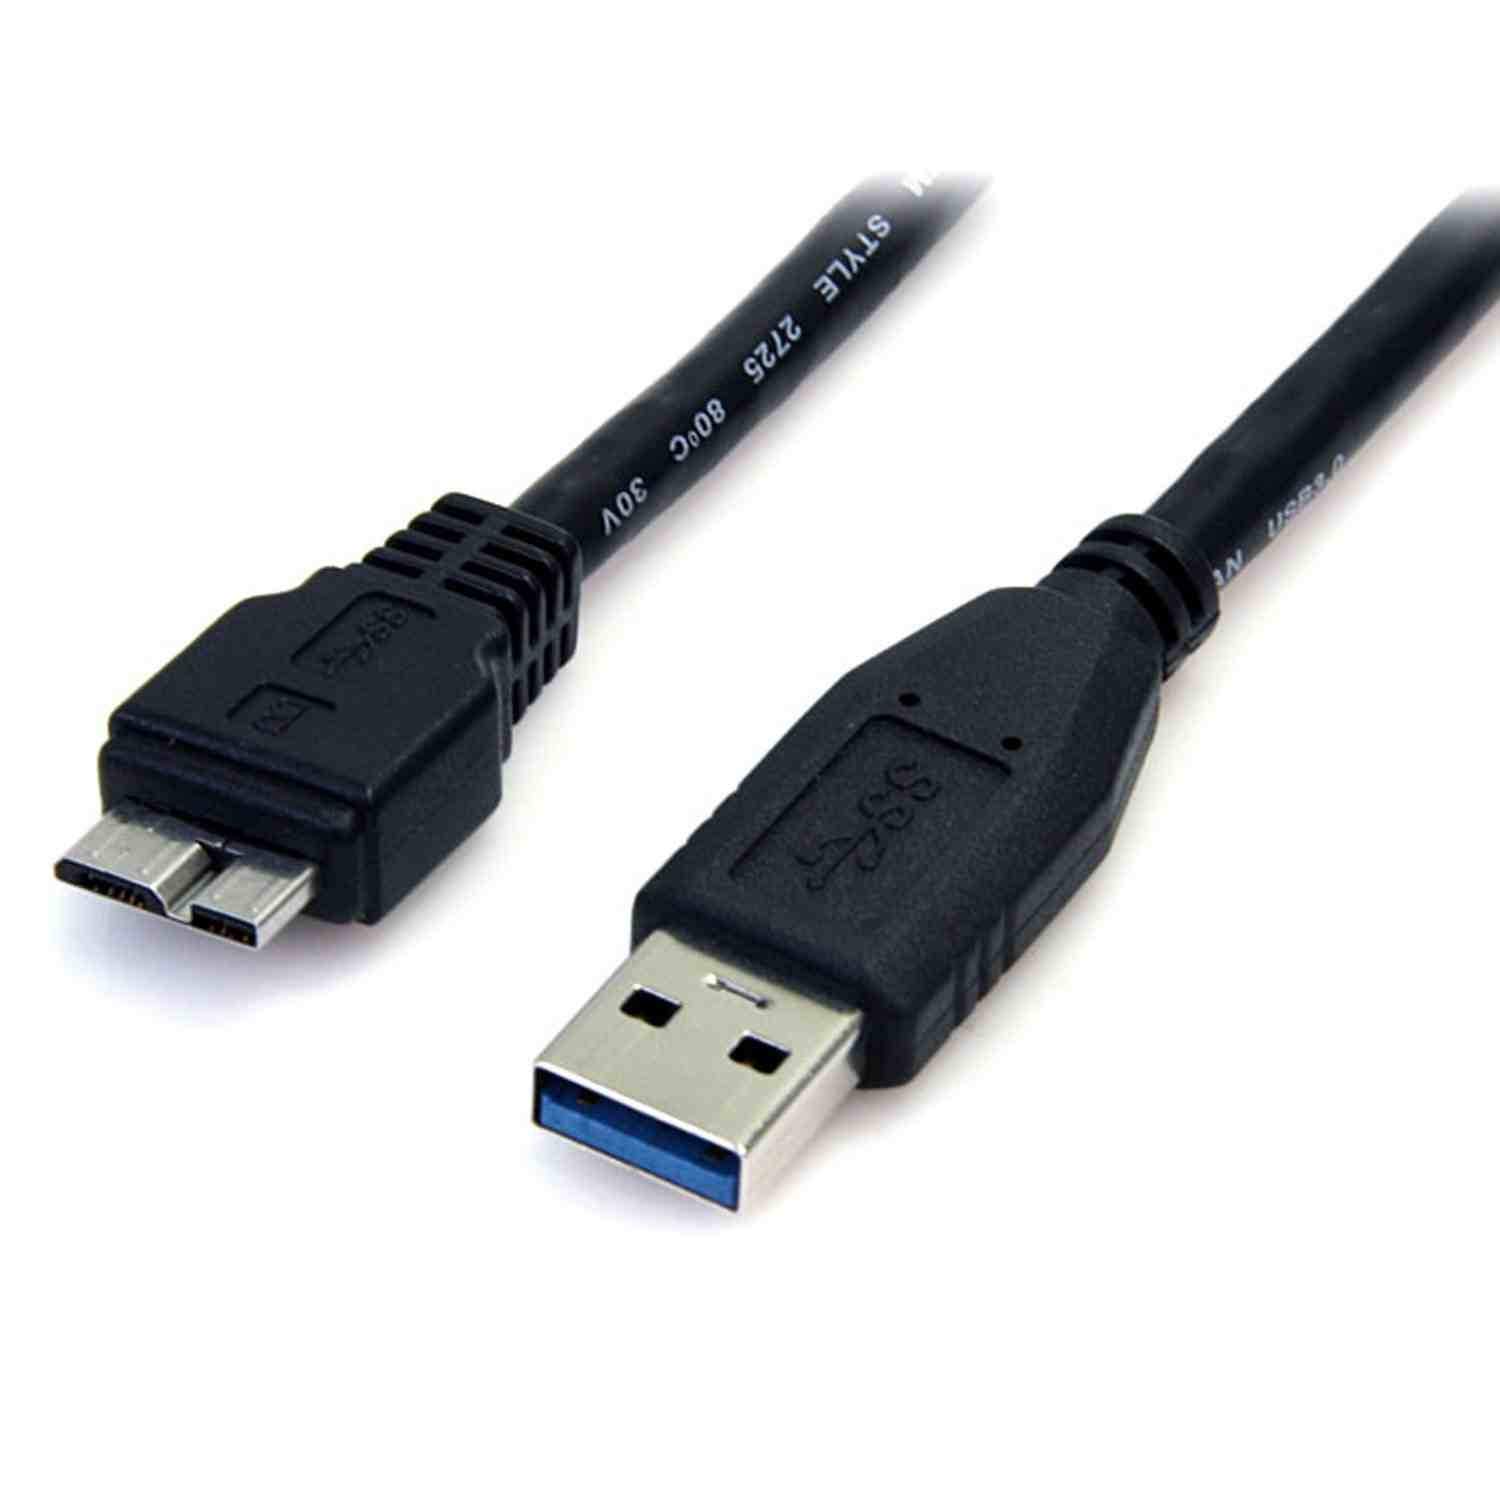 USB cable for Nikon D5